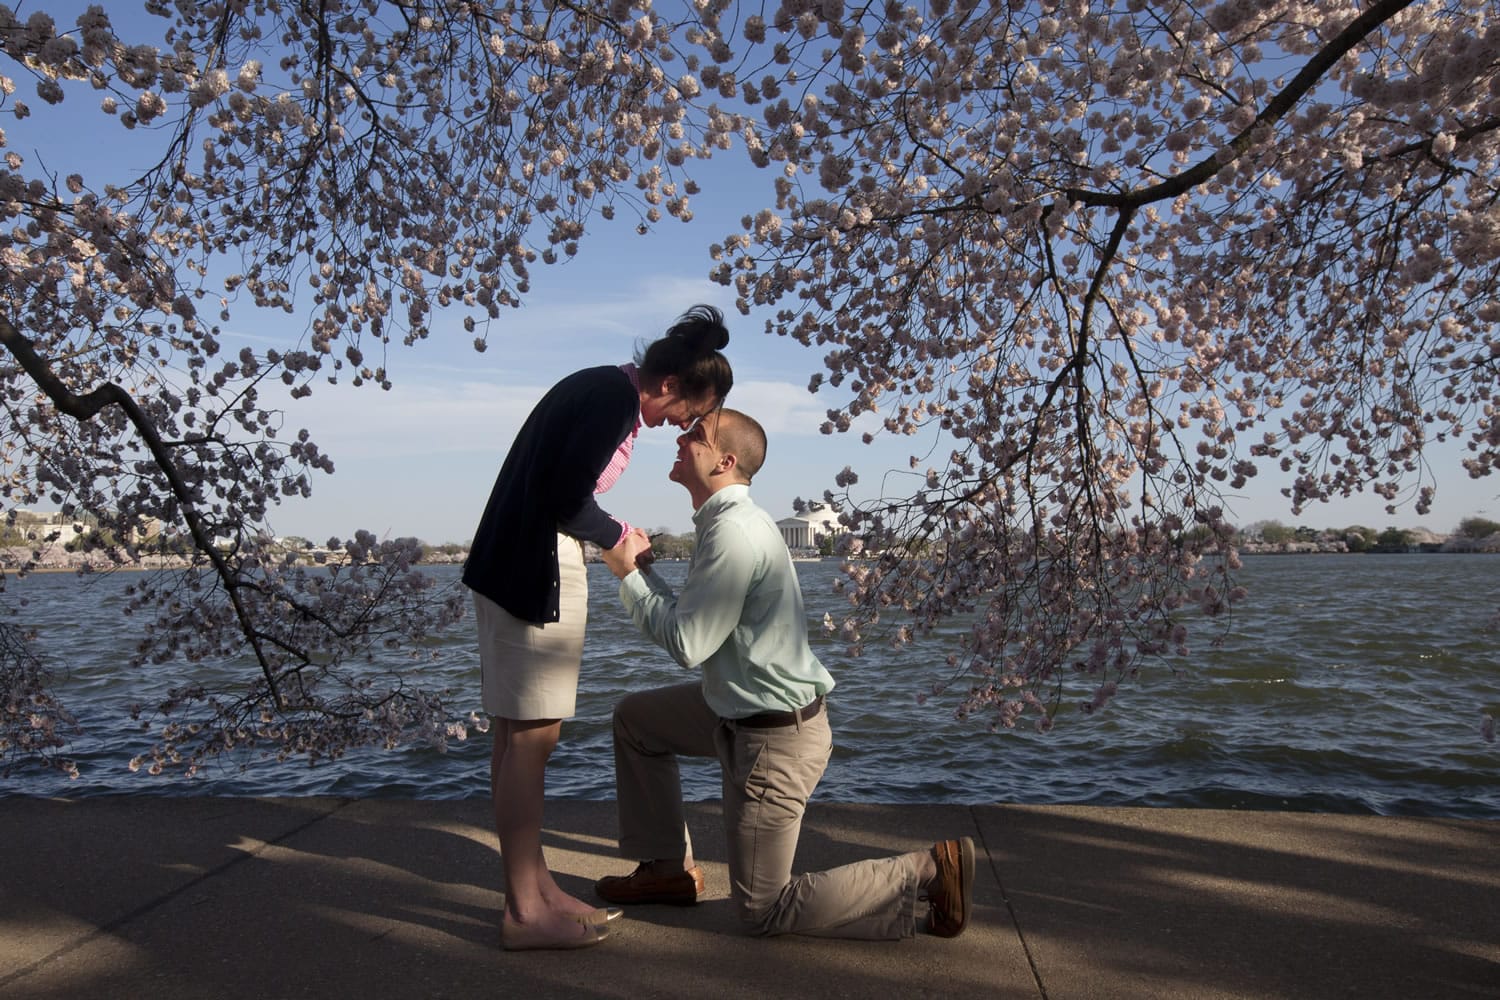 Beneath cherry blossom trees in bloom April 10 along the tidal basin in Washington, D.C., Steve Paska, 26, of Arlington, Va., asks his girlfriend of two years, Jessica Deegan, 27, to marry him.